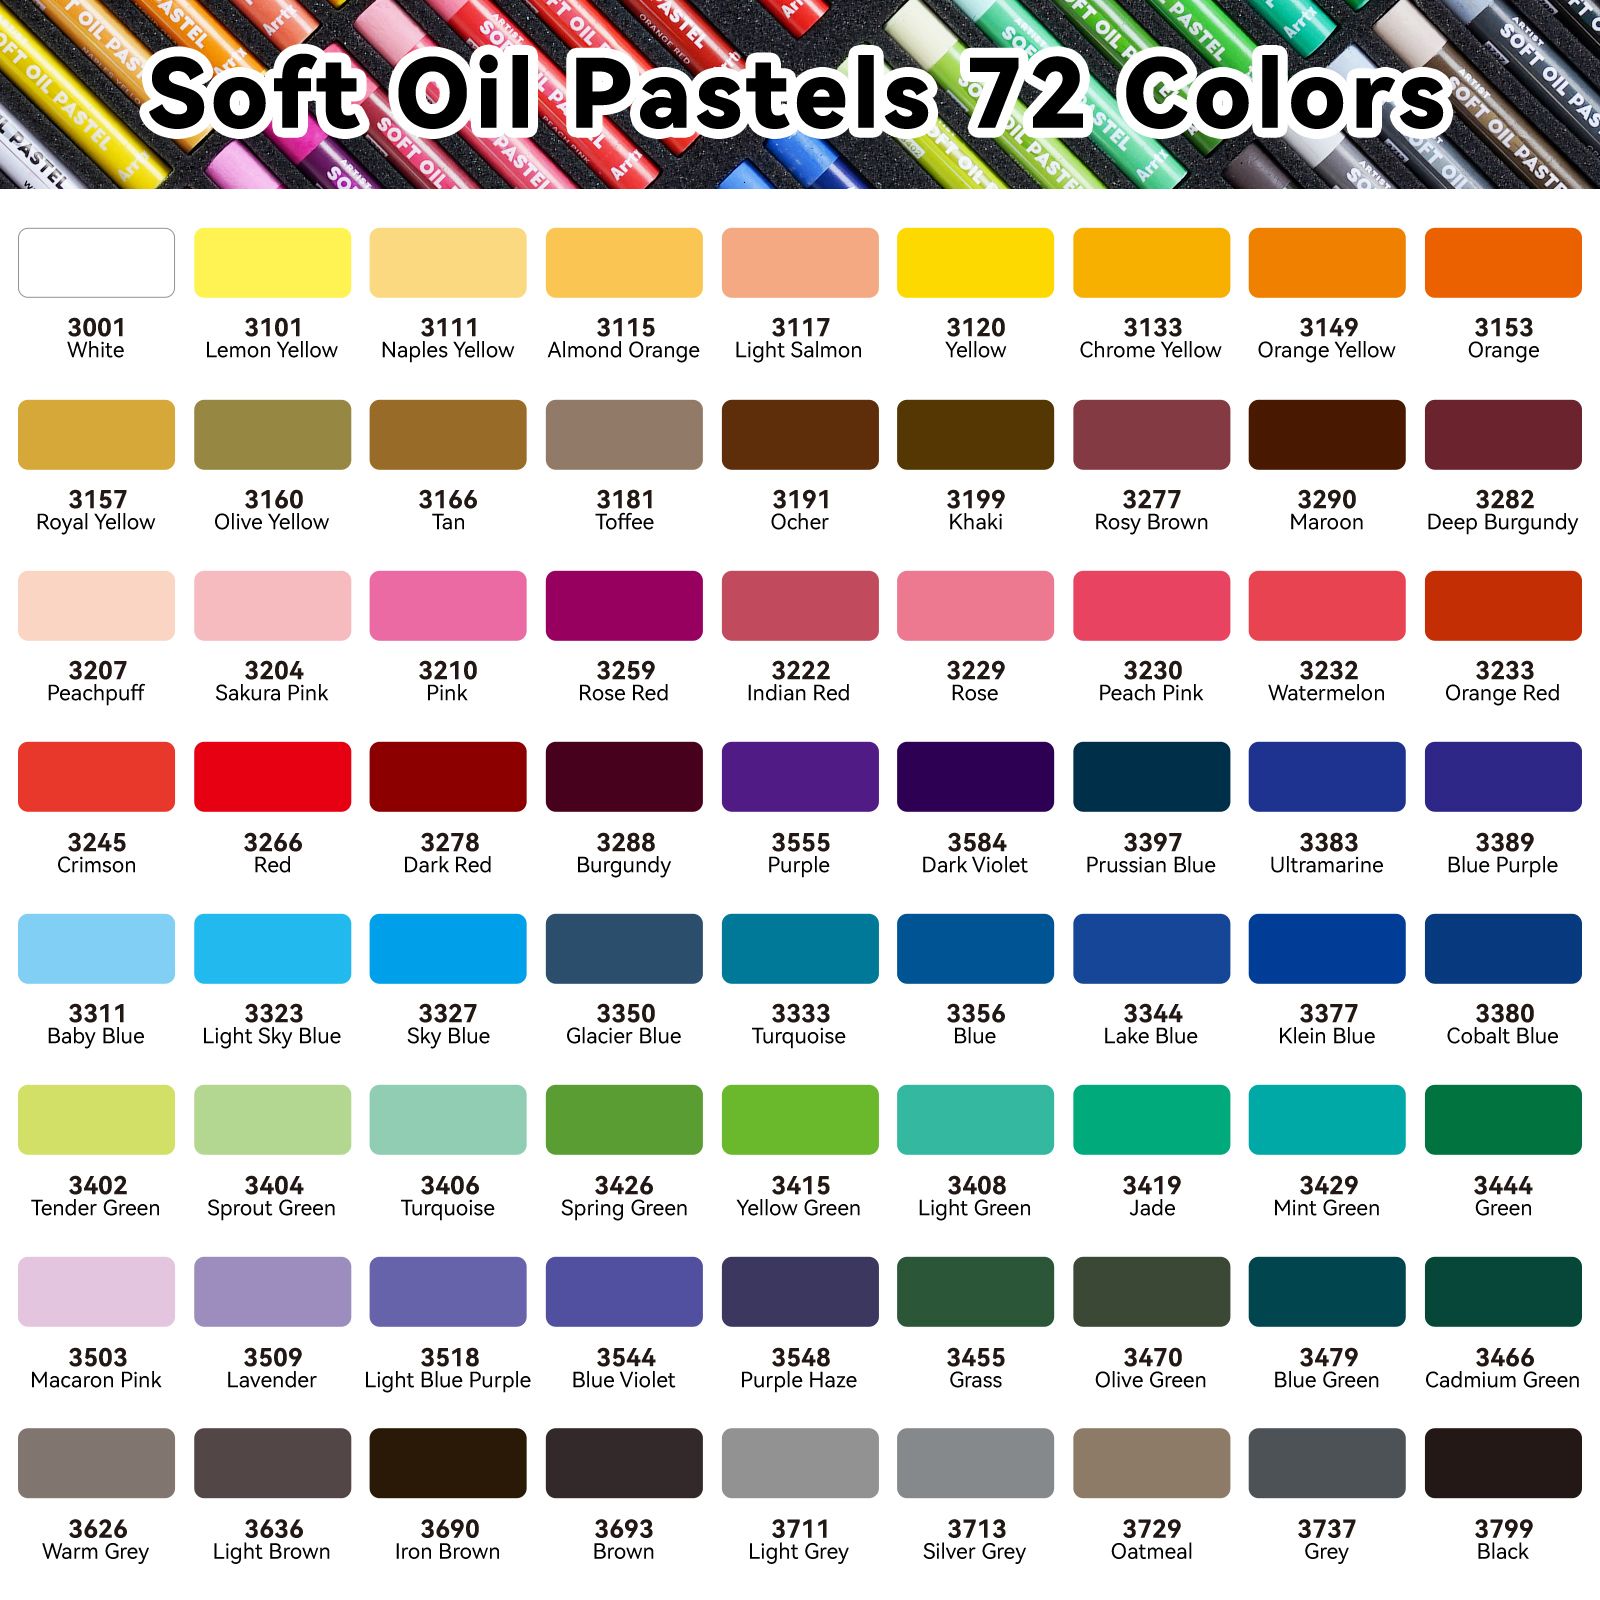 Wholesale Markers Arrtx 72 Vivid Colors Soft Oil Pastel Pencils  Professional Oil Pastel Crayons For Drawing Artist Art Supplies 230719 From  Yao10, $42.21